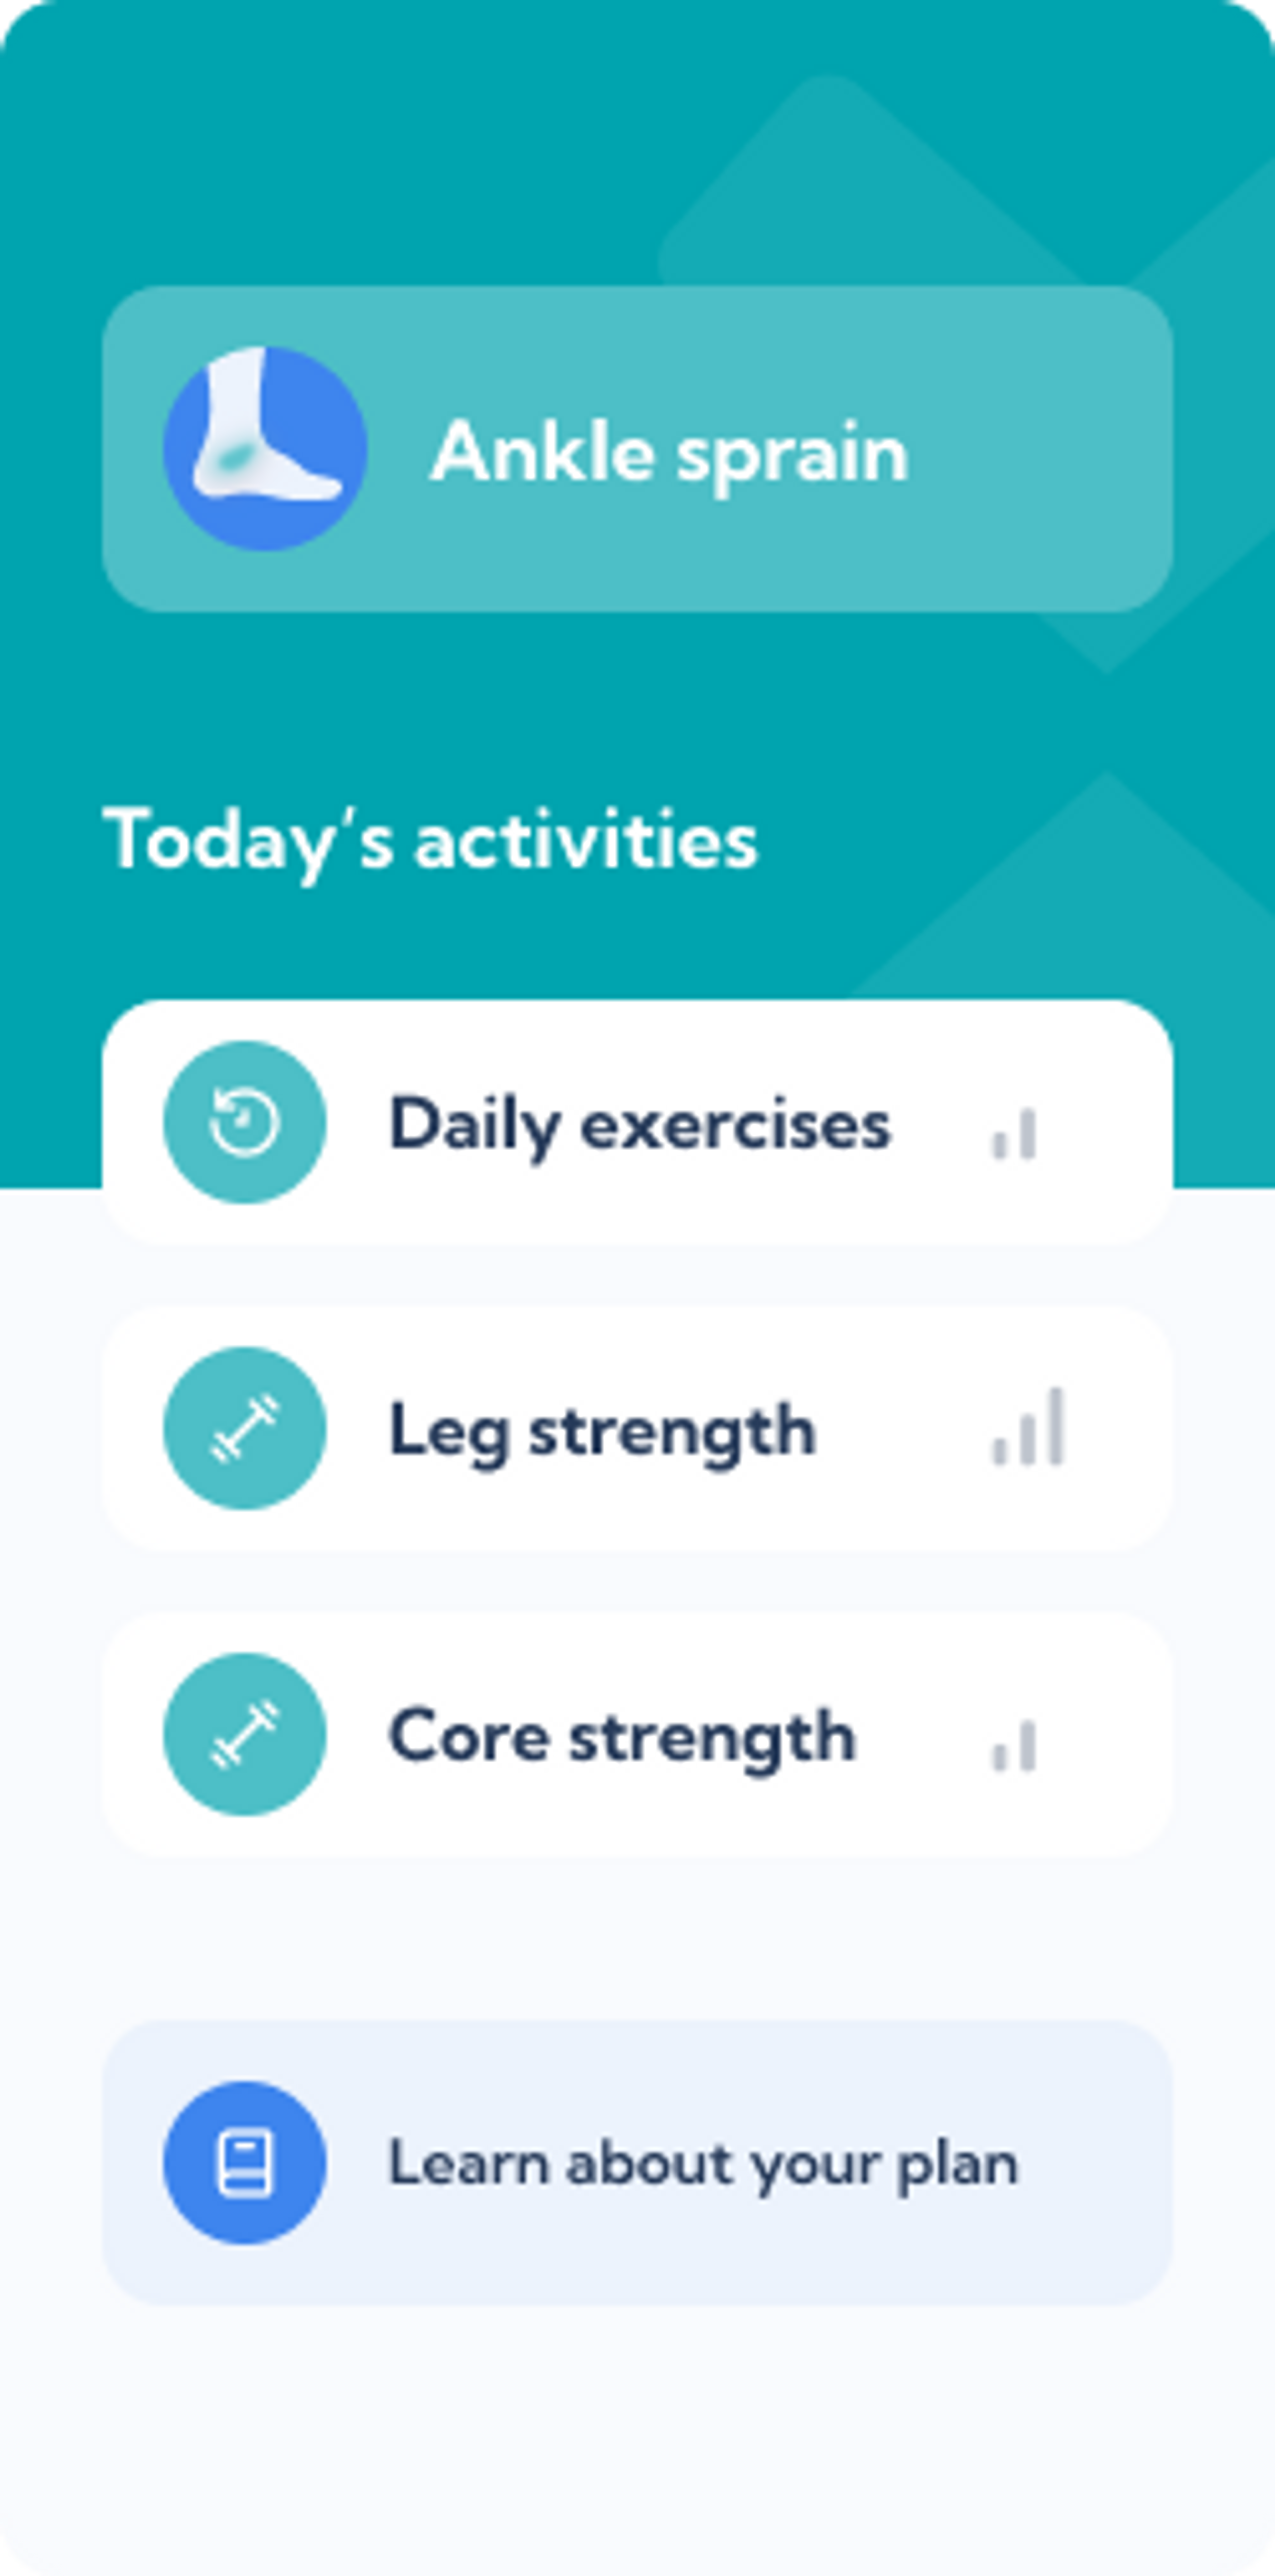 Ankle sprain treatment plan – Dashboard overview of the Exakt Health app